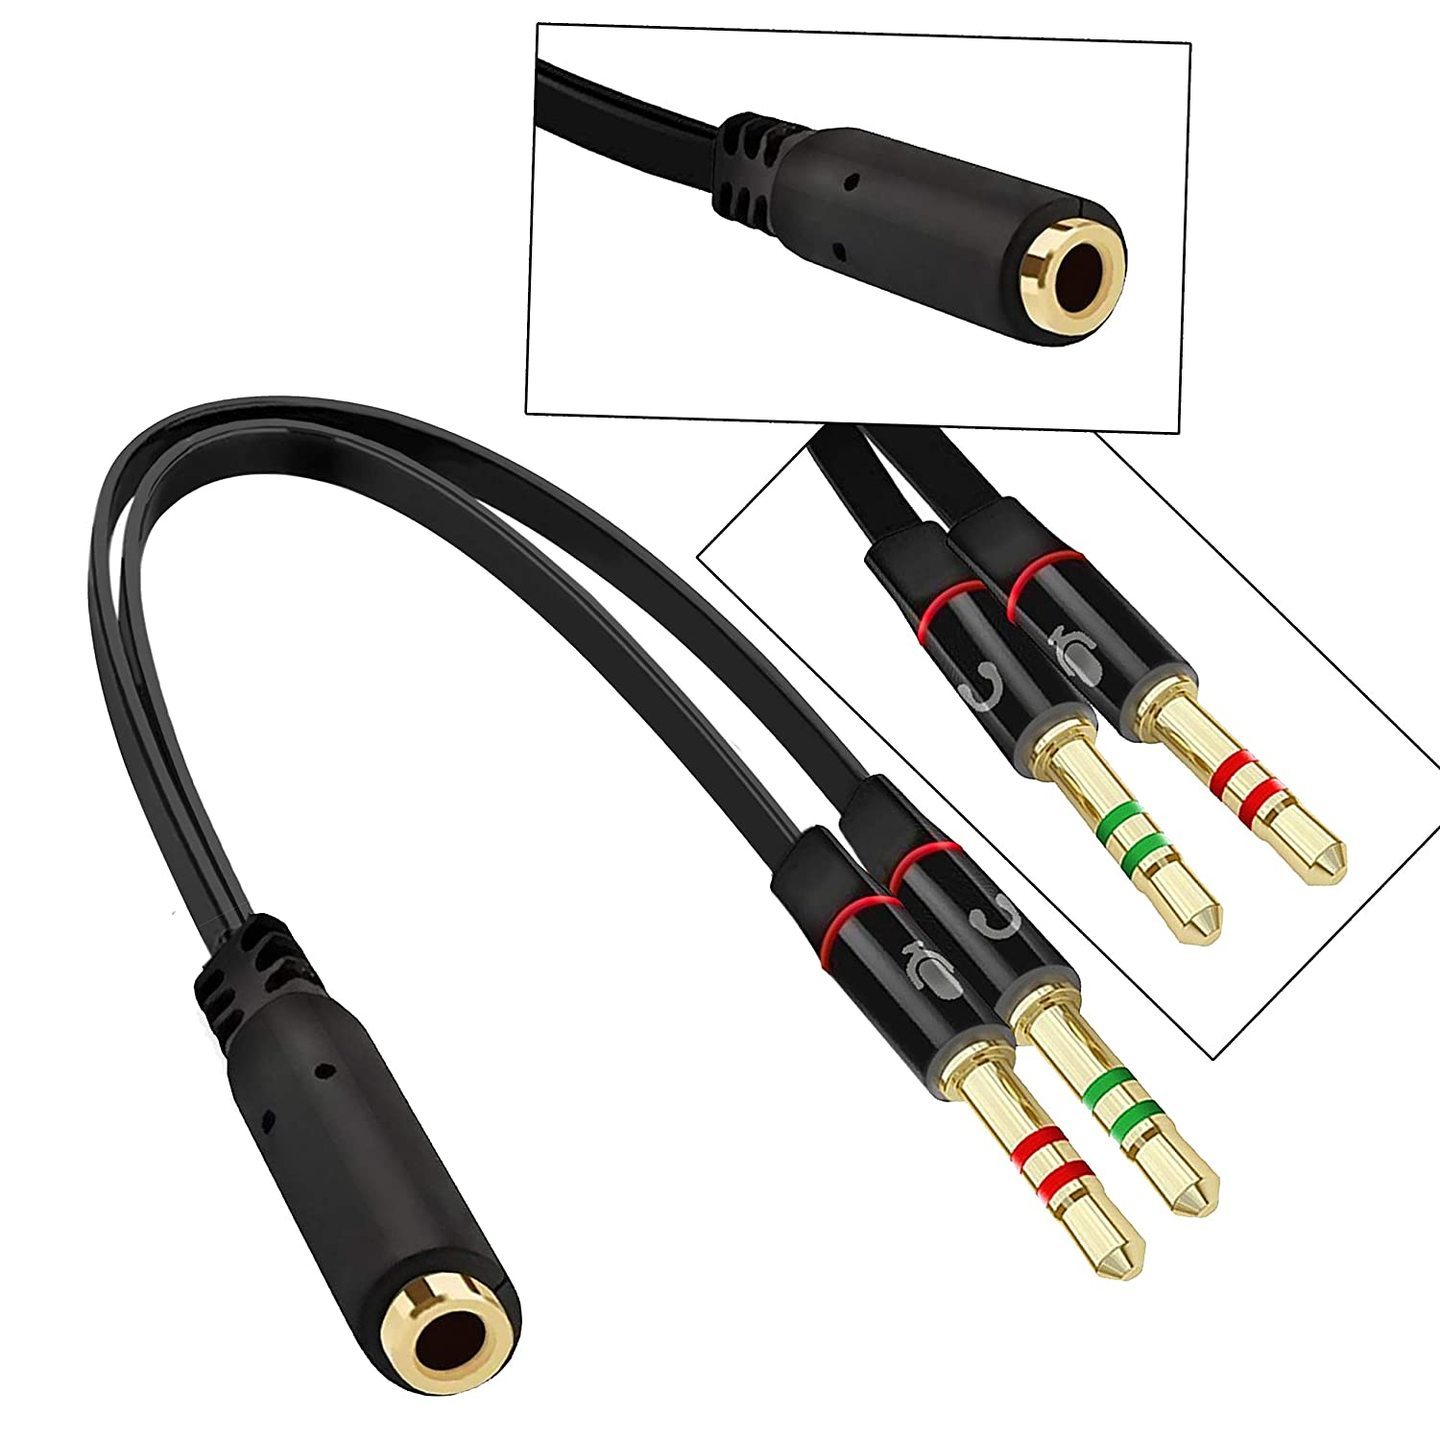 Gold Plated 2 male to 1 female 3.5mm Headphone Earphone Mic Audio Y Splitter Cable For PC Laptop (20cm)– Black